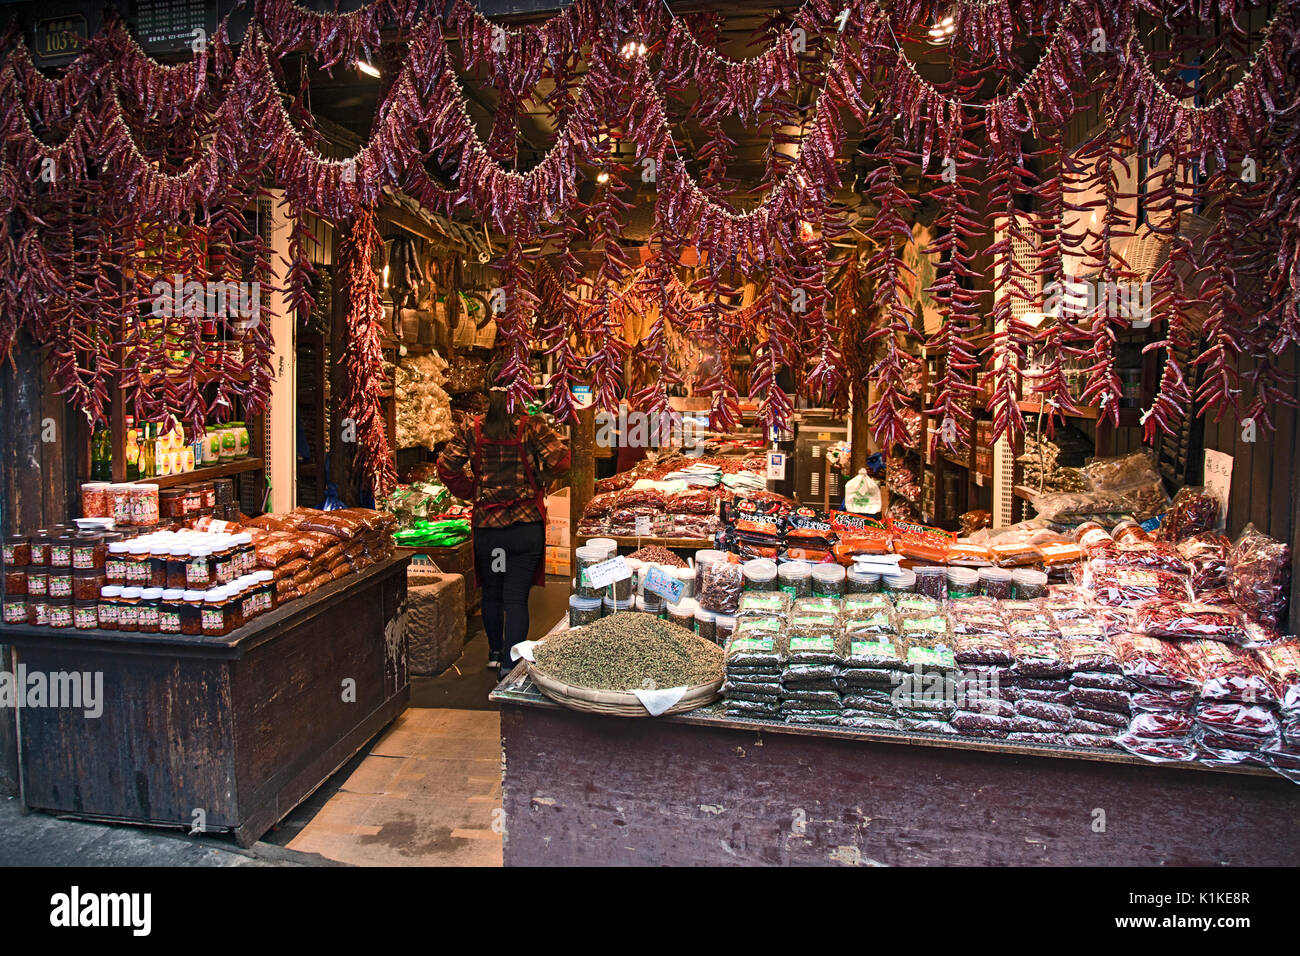 Loops of red peppers decorate the entrance to a spices and foodstuffs shop on the main street of Ciqikou Old Town, Chongqing, China. Stock Photo